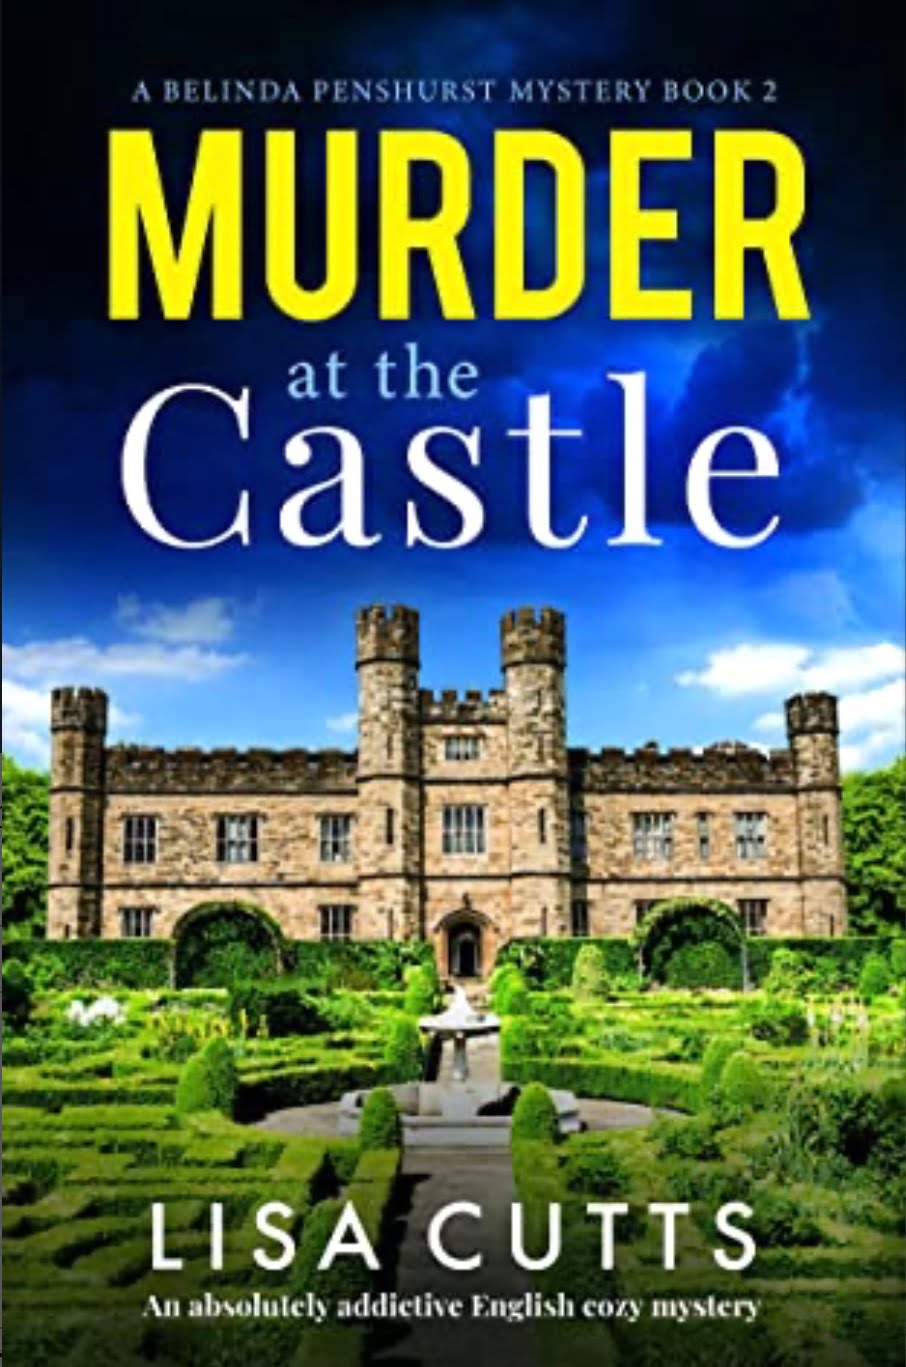 MURDER AT THE CASTLE BY LISA CUTTS – BOOK REVIEW